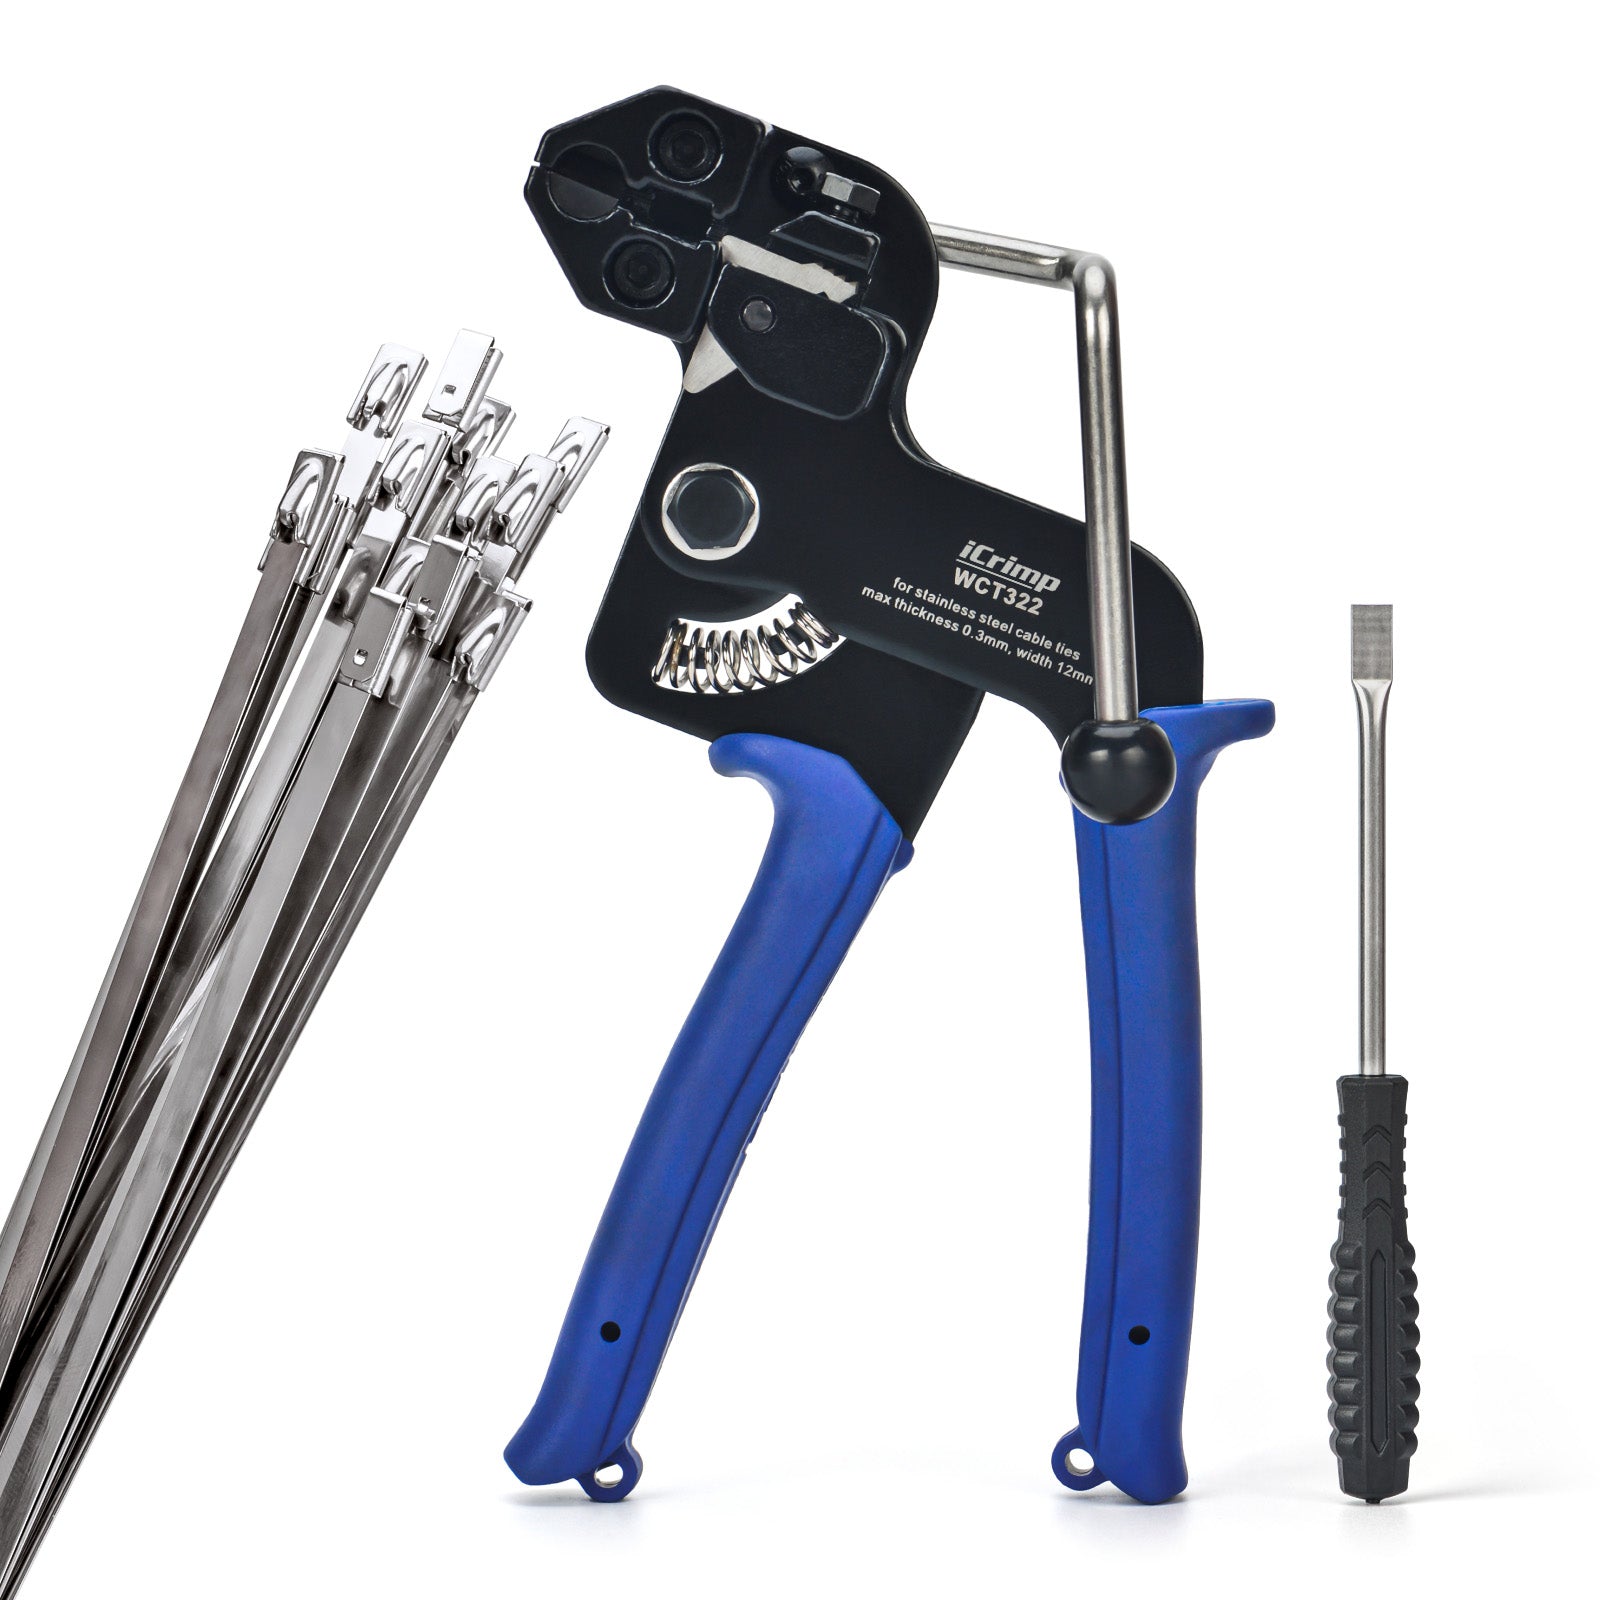 Rapid Rope Cutter - Easily shear through cord up to 3/4 inch (19mm)  thickness